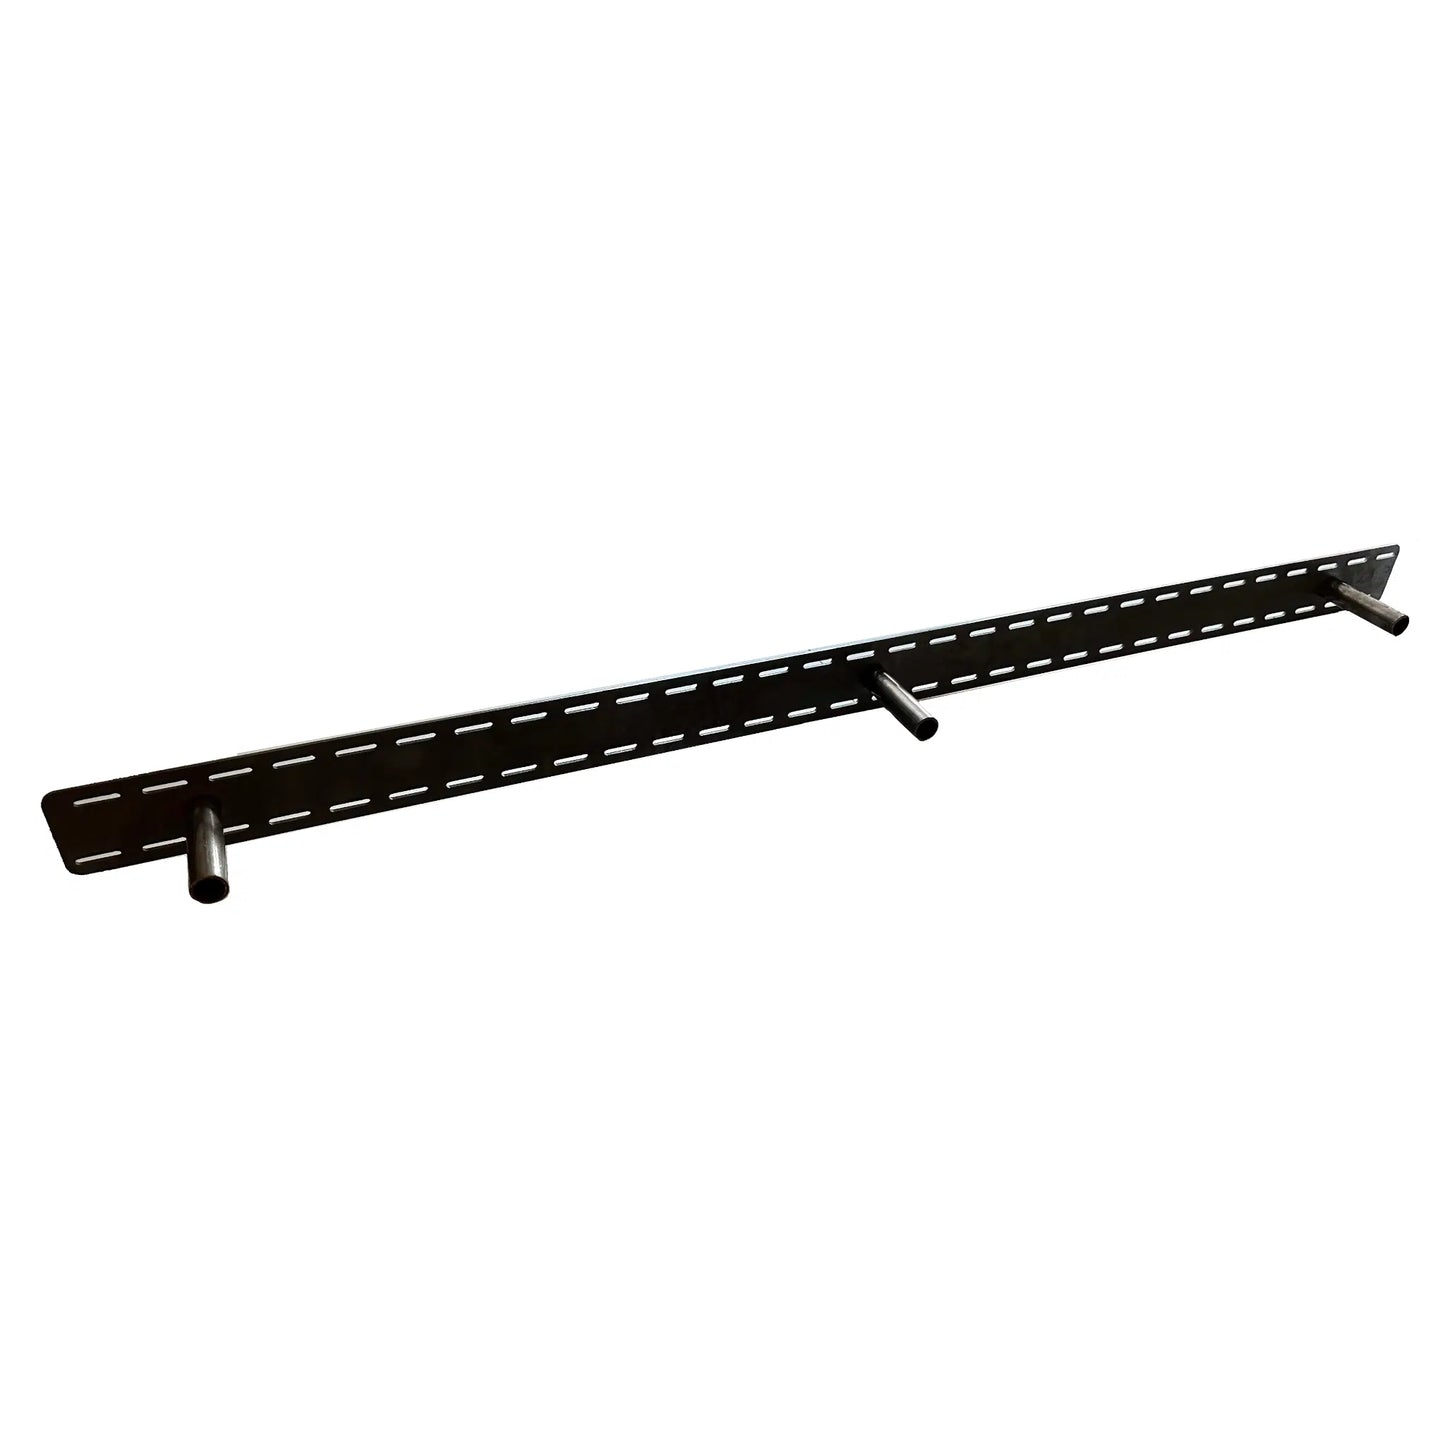 steel floating bracket with a plate on the back and slots for screws around the perimeter of the plate. Three rods extend out from the plate that will go into the mantel or shelf for mounting.